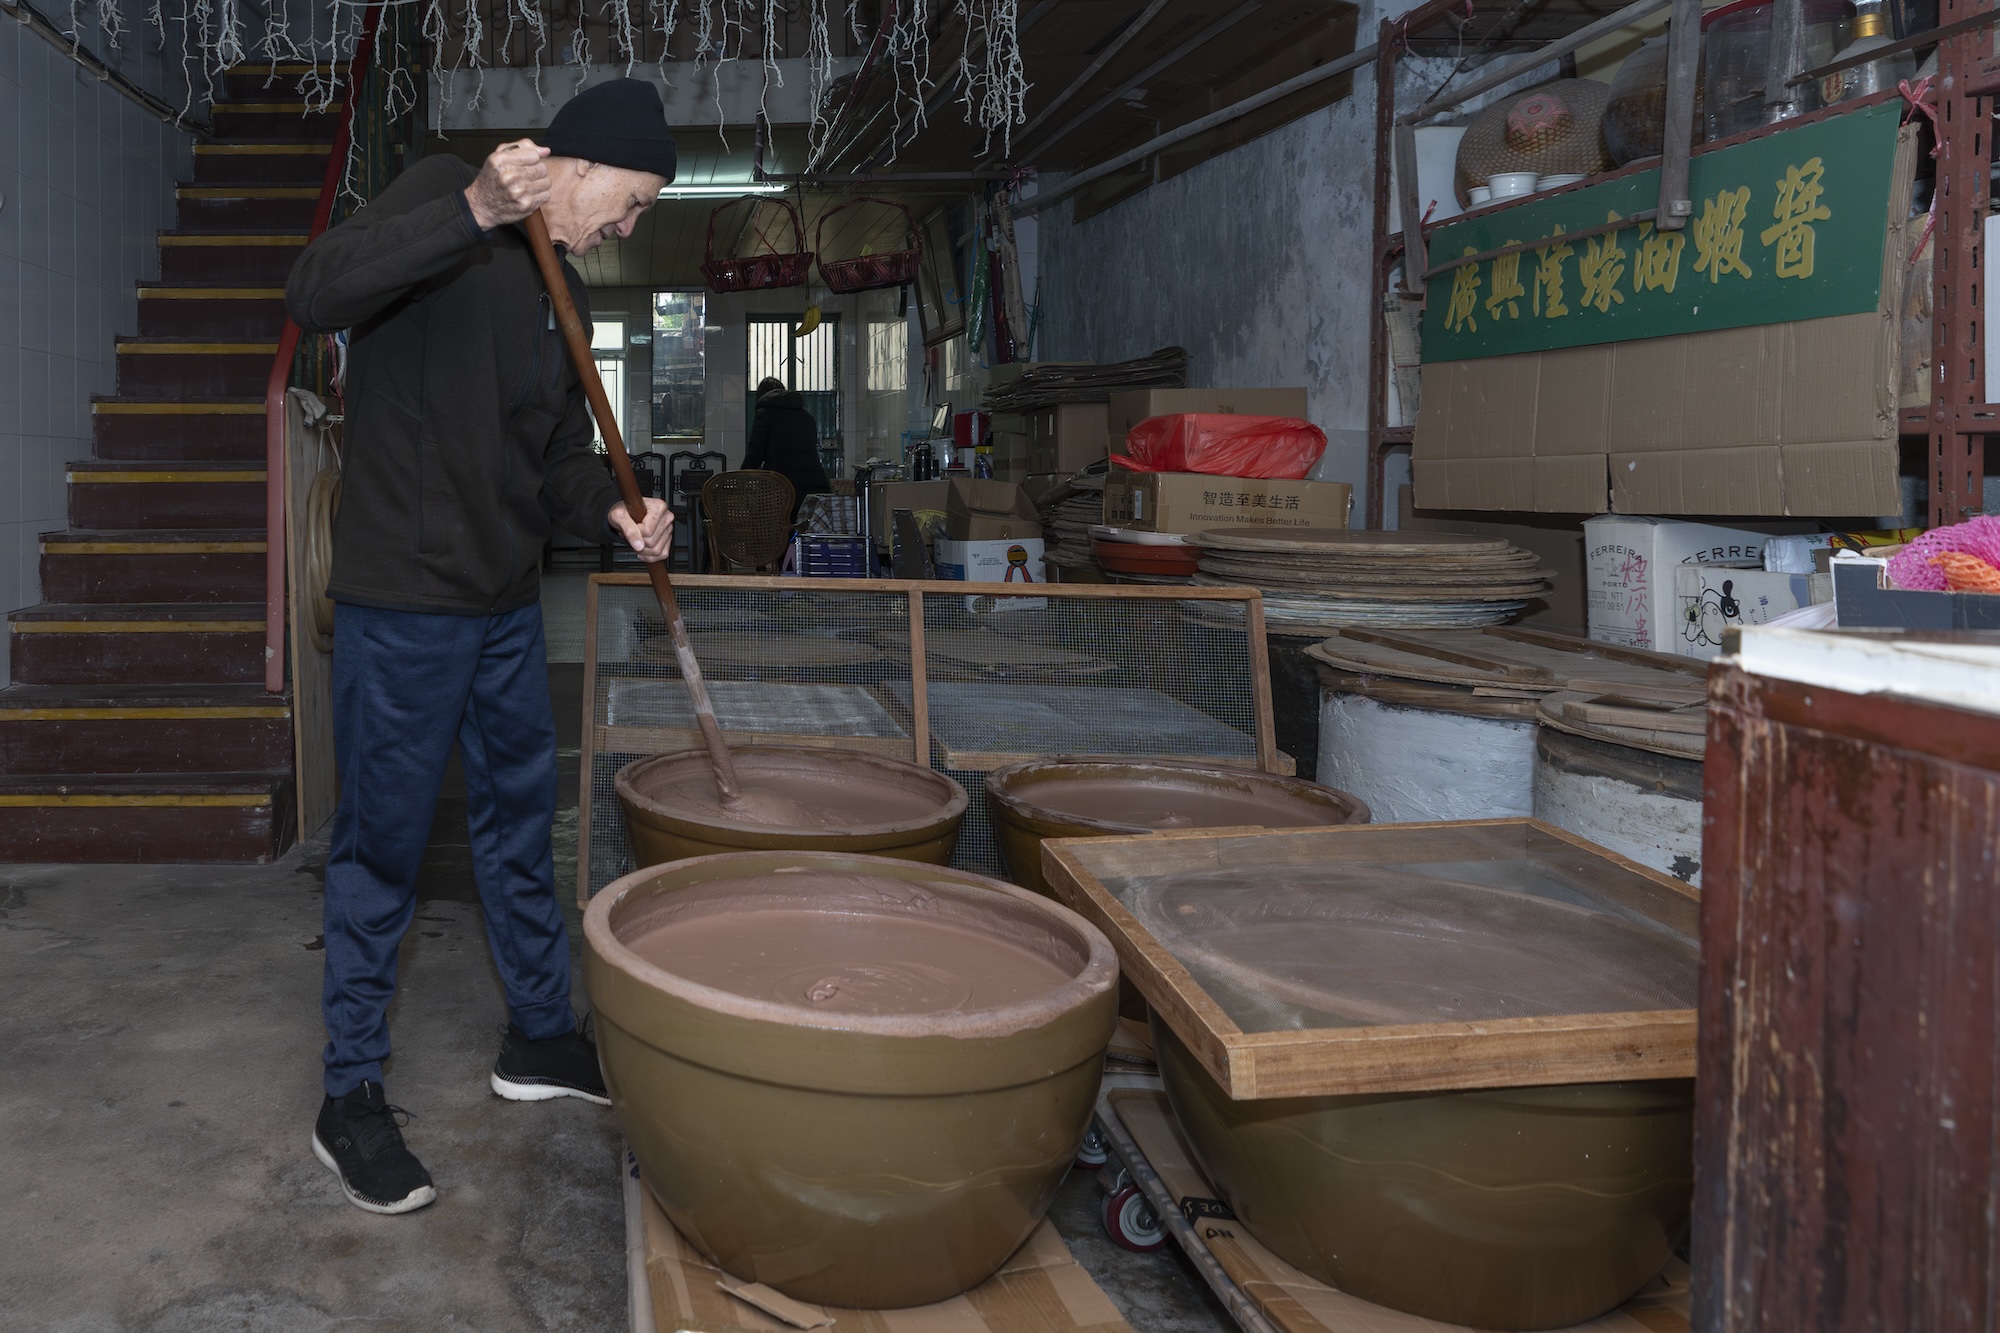 Paolo Pong carries on the long-standing family tradition of hand-making shrimp paste